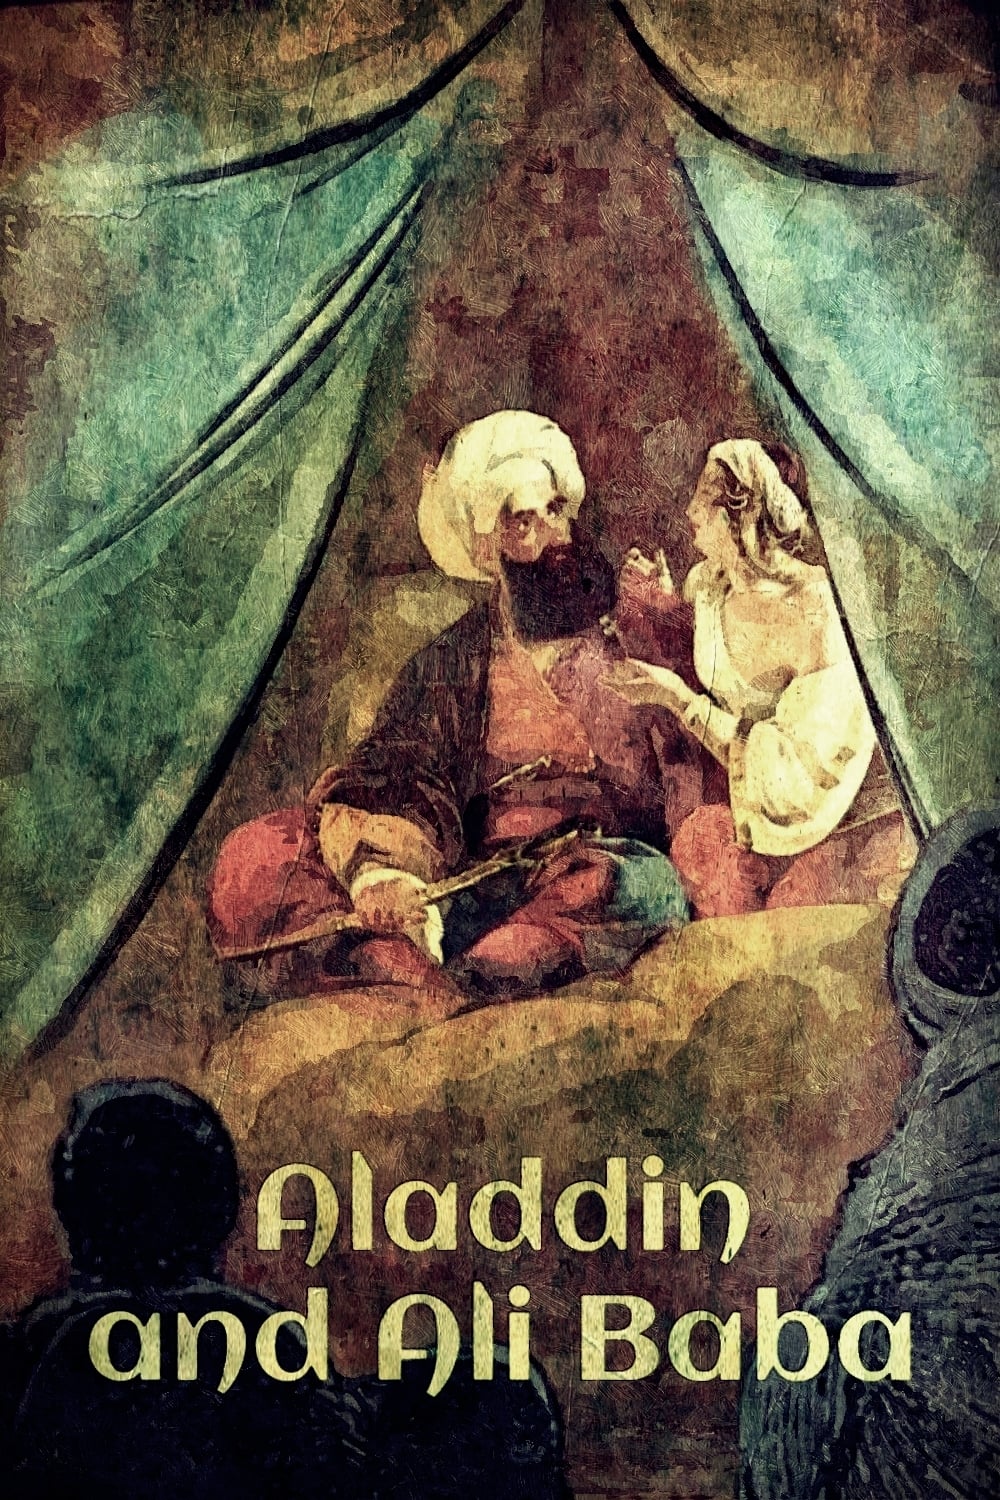 Aladdin and Ali Baba: Stories from the 1001 Nights?